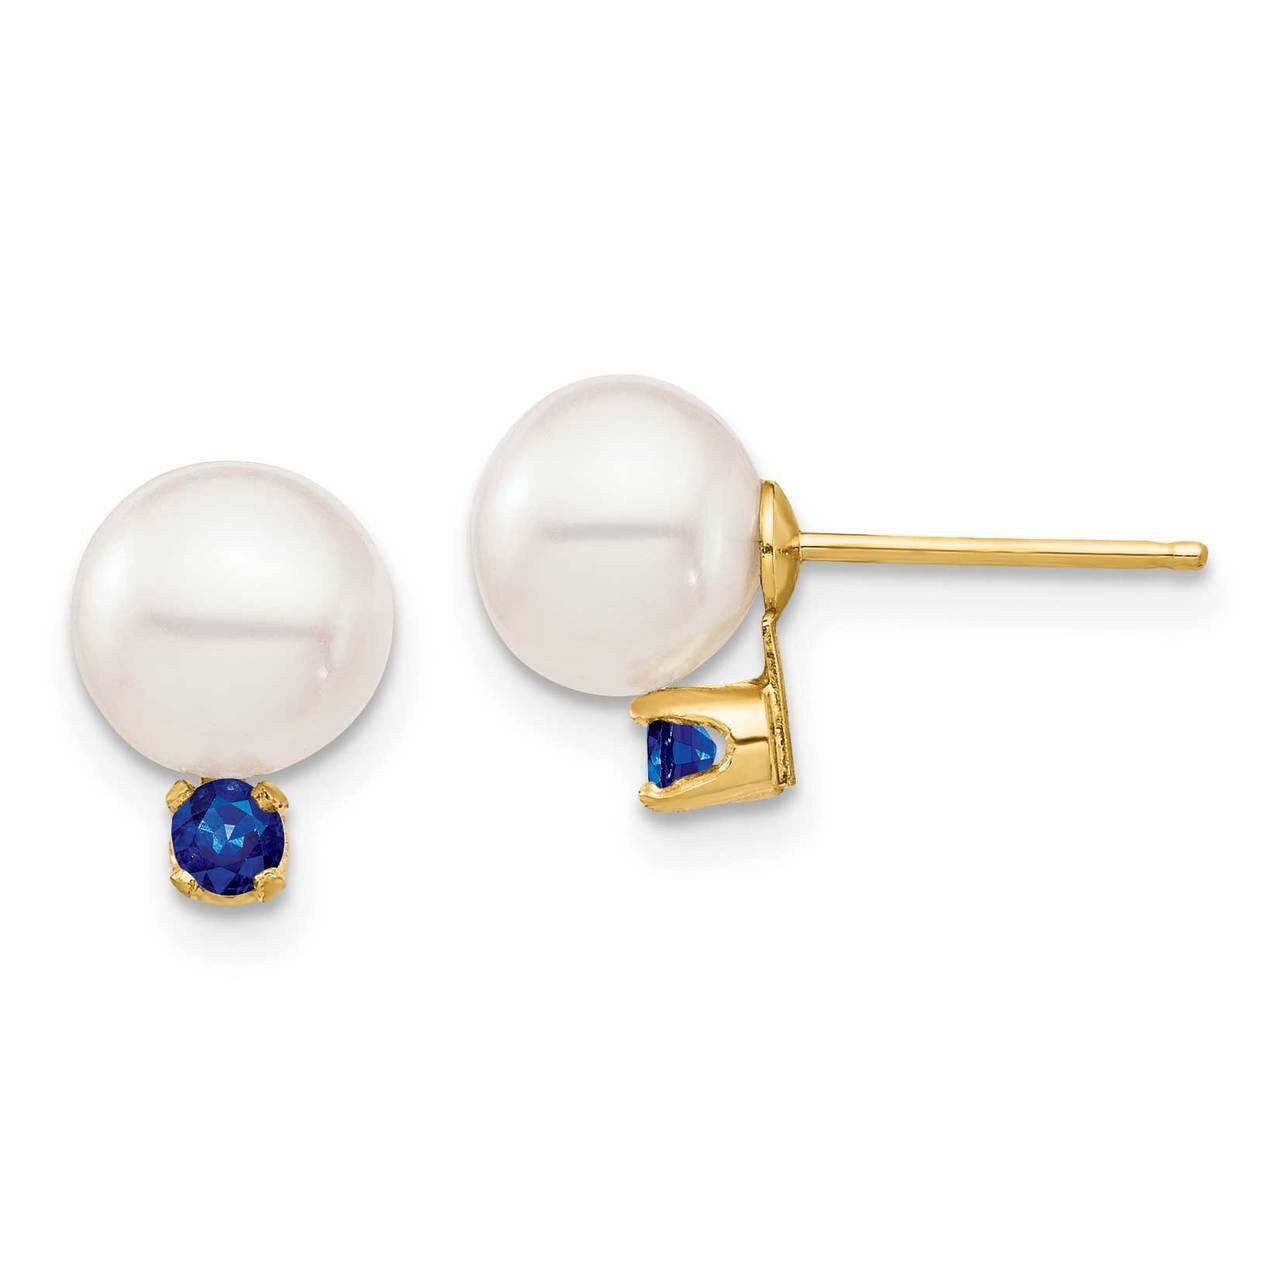 7-7.5mm White Round Freshwater Cultured Pearl Sapphire Post Earrings 14k Gold XF753E_S